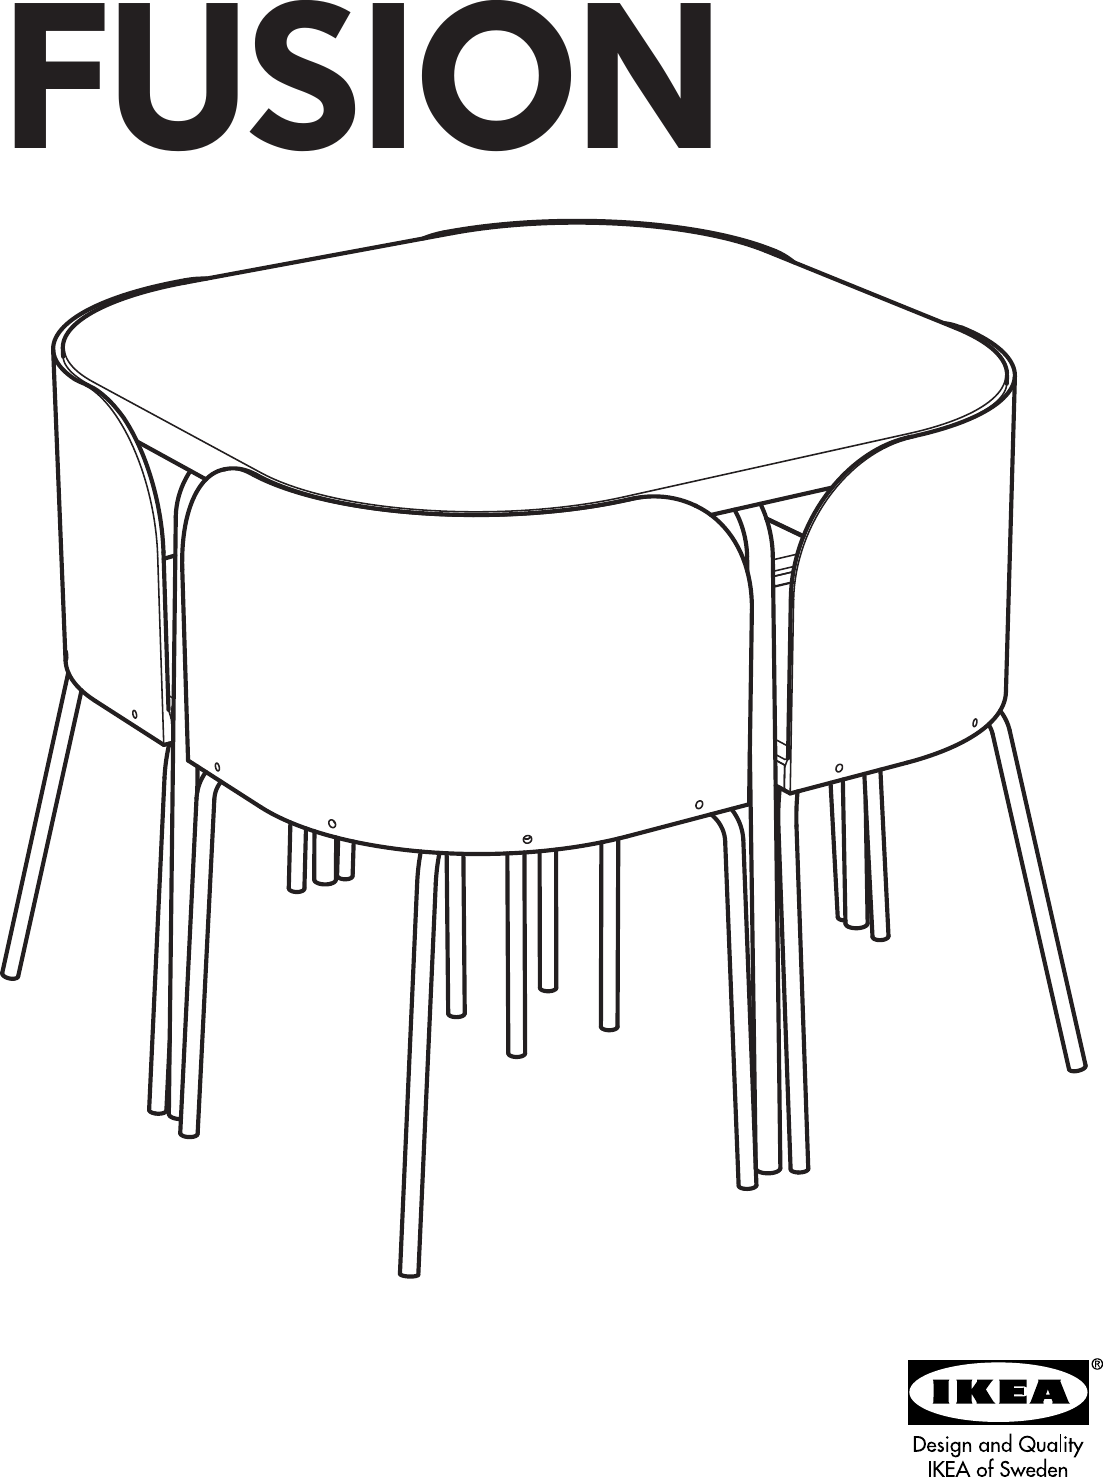 Page 1 of 8 - Ikea Ikea-Fusion-Tablel-4-Chairs-Assembly-Instruction